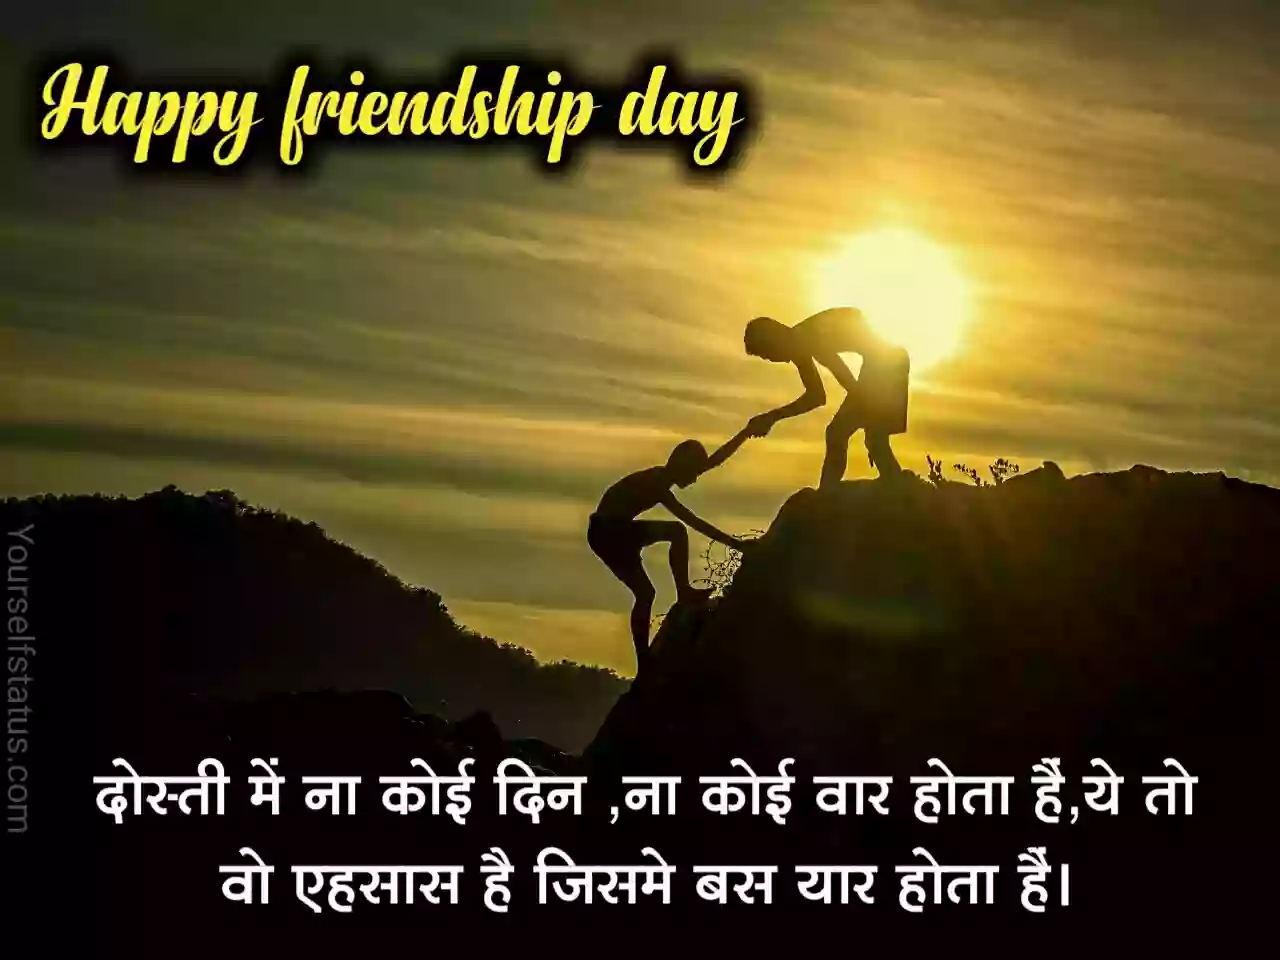 Friendship day greetings in hindi